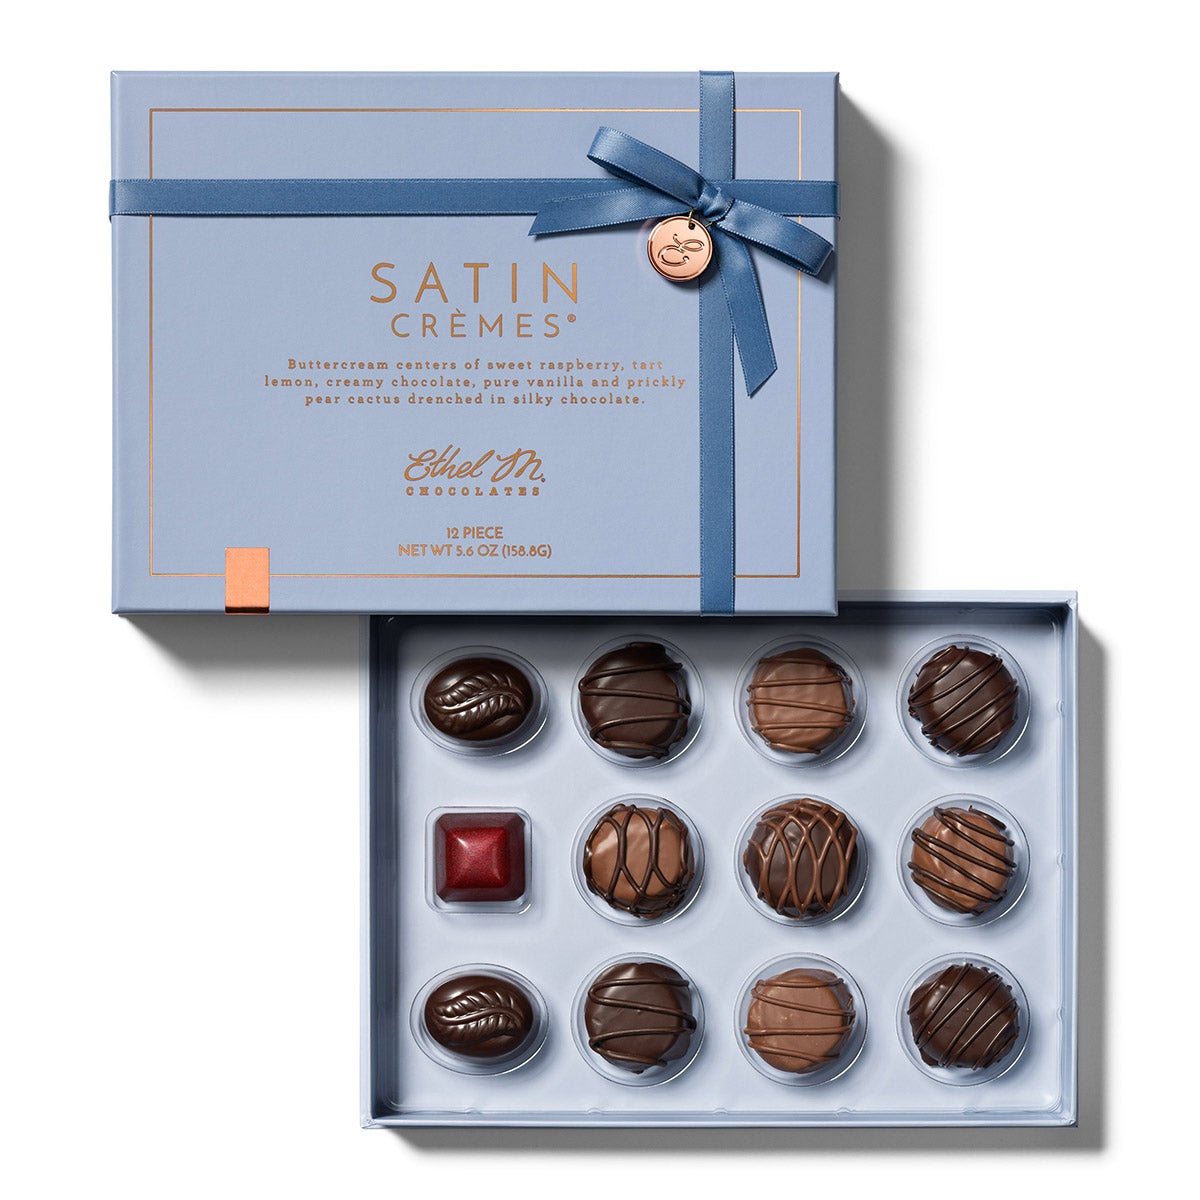 A 12pc Box filled with Ethel M Chocolates' Exquisite and Fresh Satin Crème pieces including Lemon, Prickly Pear, Raspberry, Vanilla, and Chocolate.